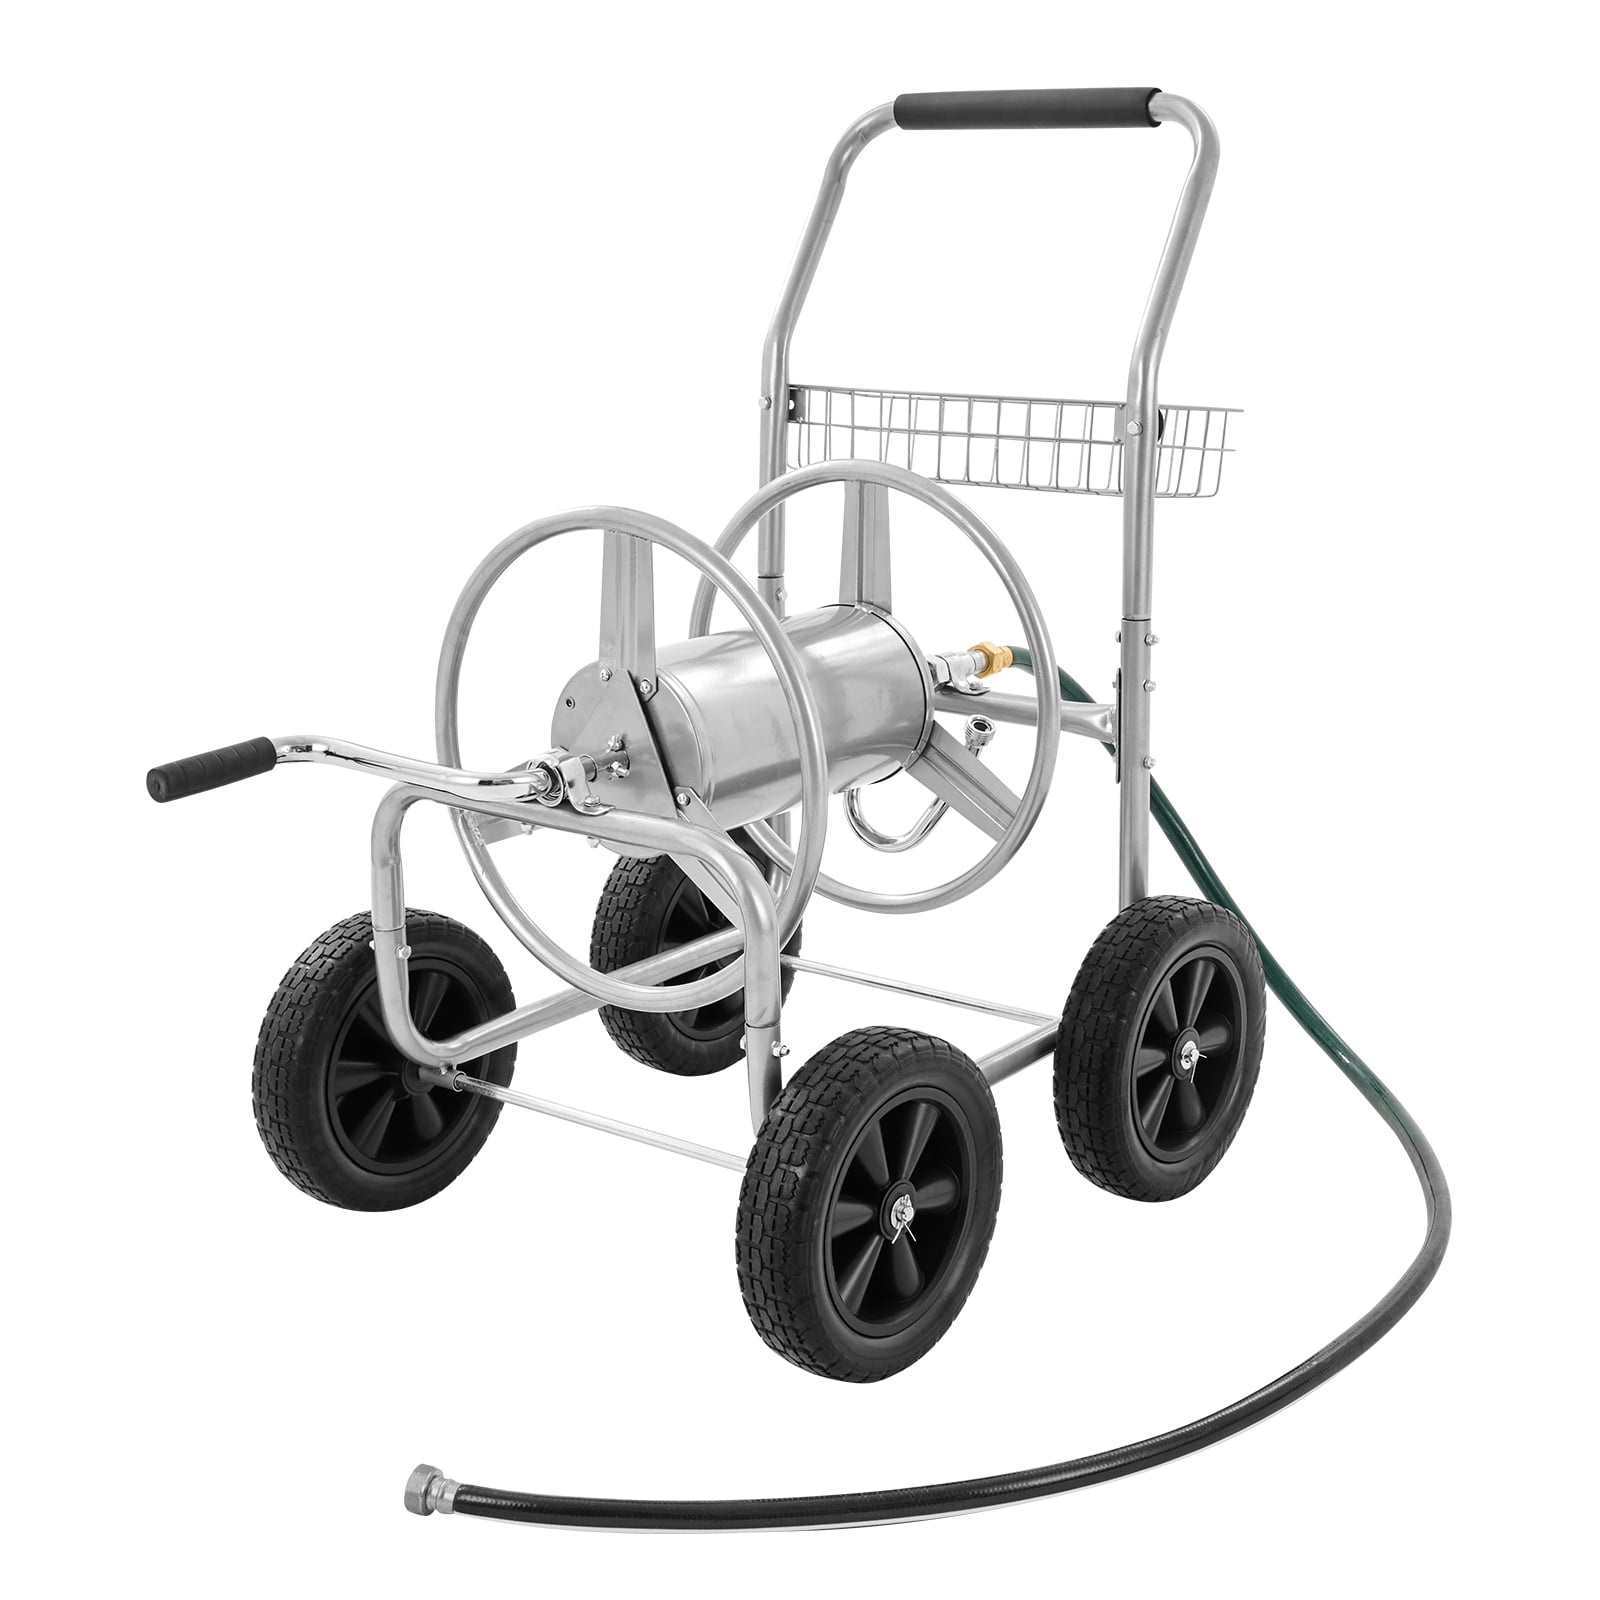 BENTISM Hose Reel Cart with Wheels, Metal hose reel Holds 250 Feet of 5/8  Hose Capacity Heavy Duty Outdoor Water Planting Truck for Yard, Garden 